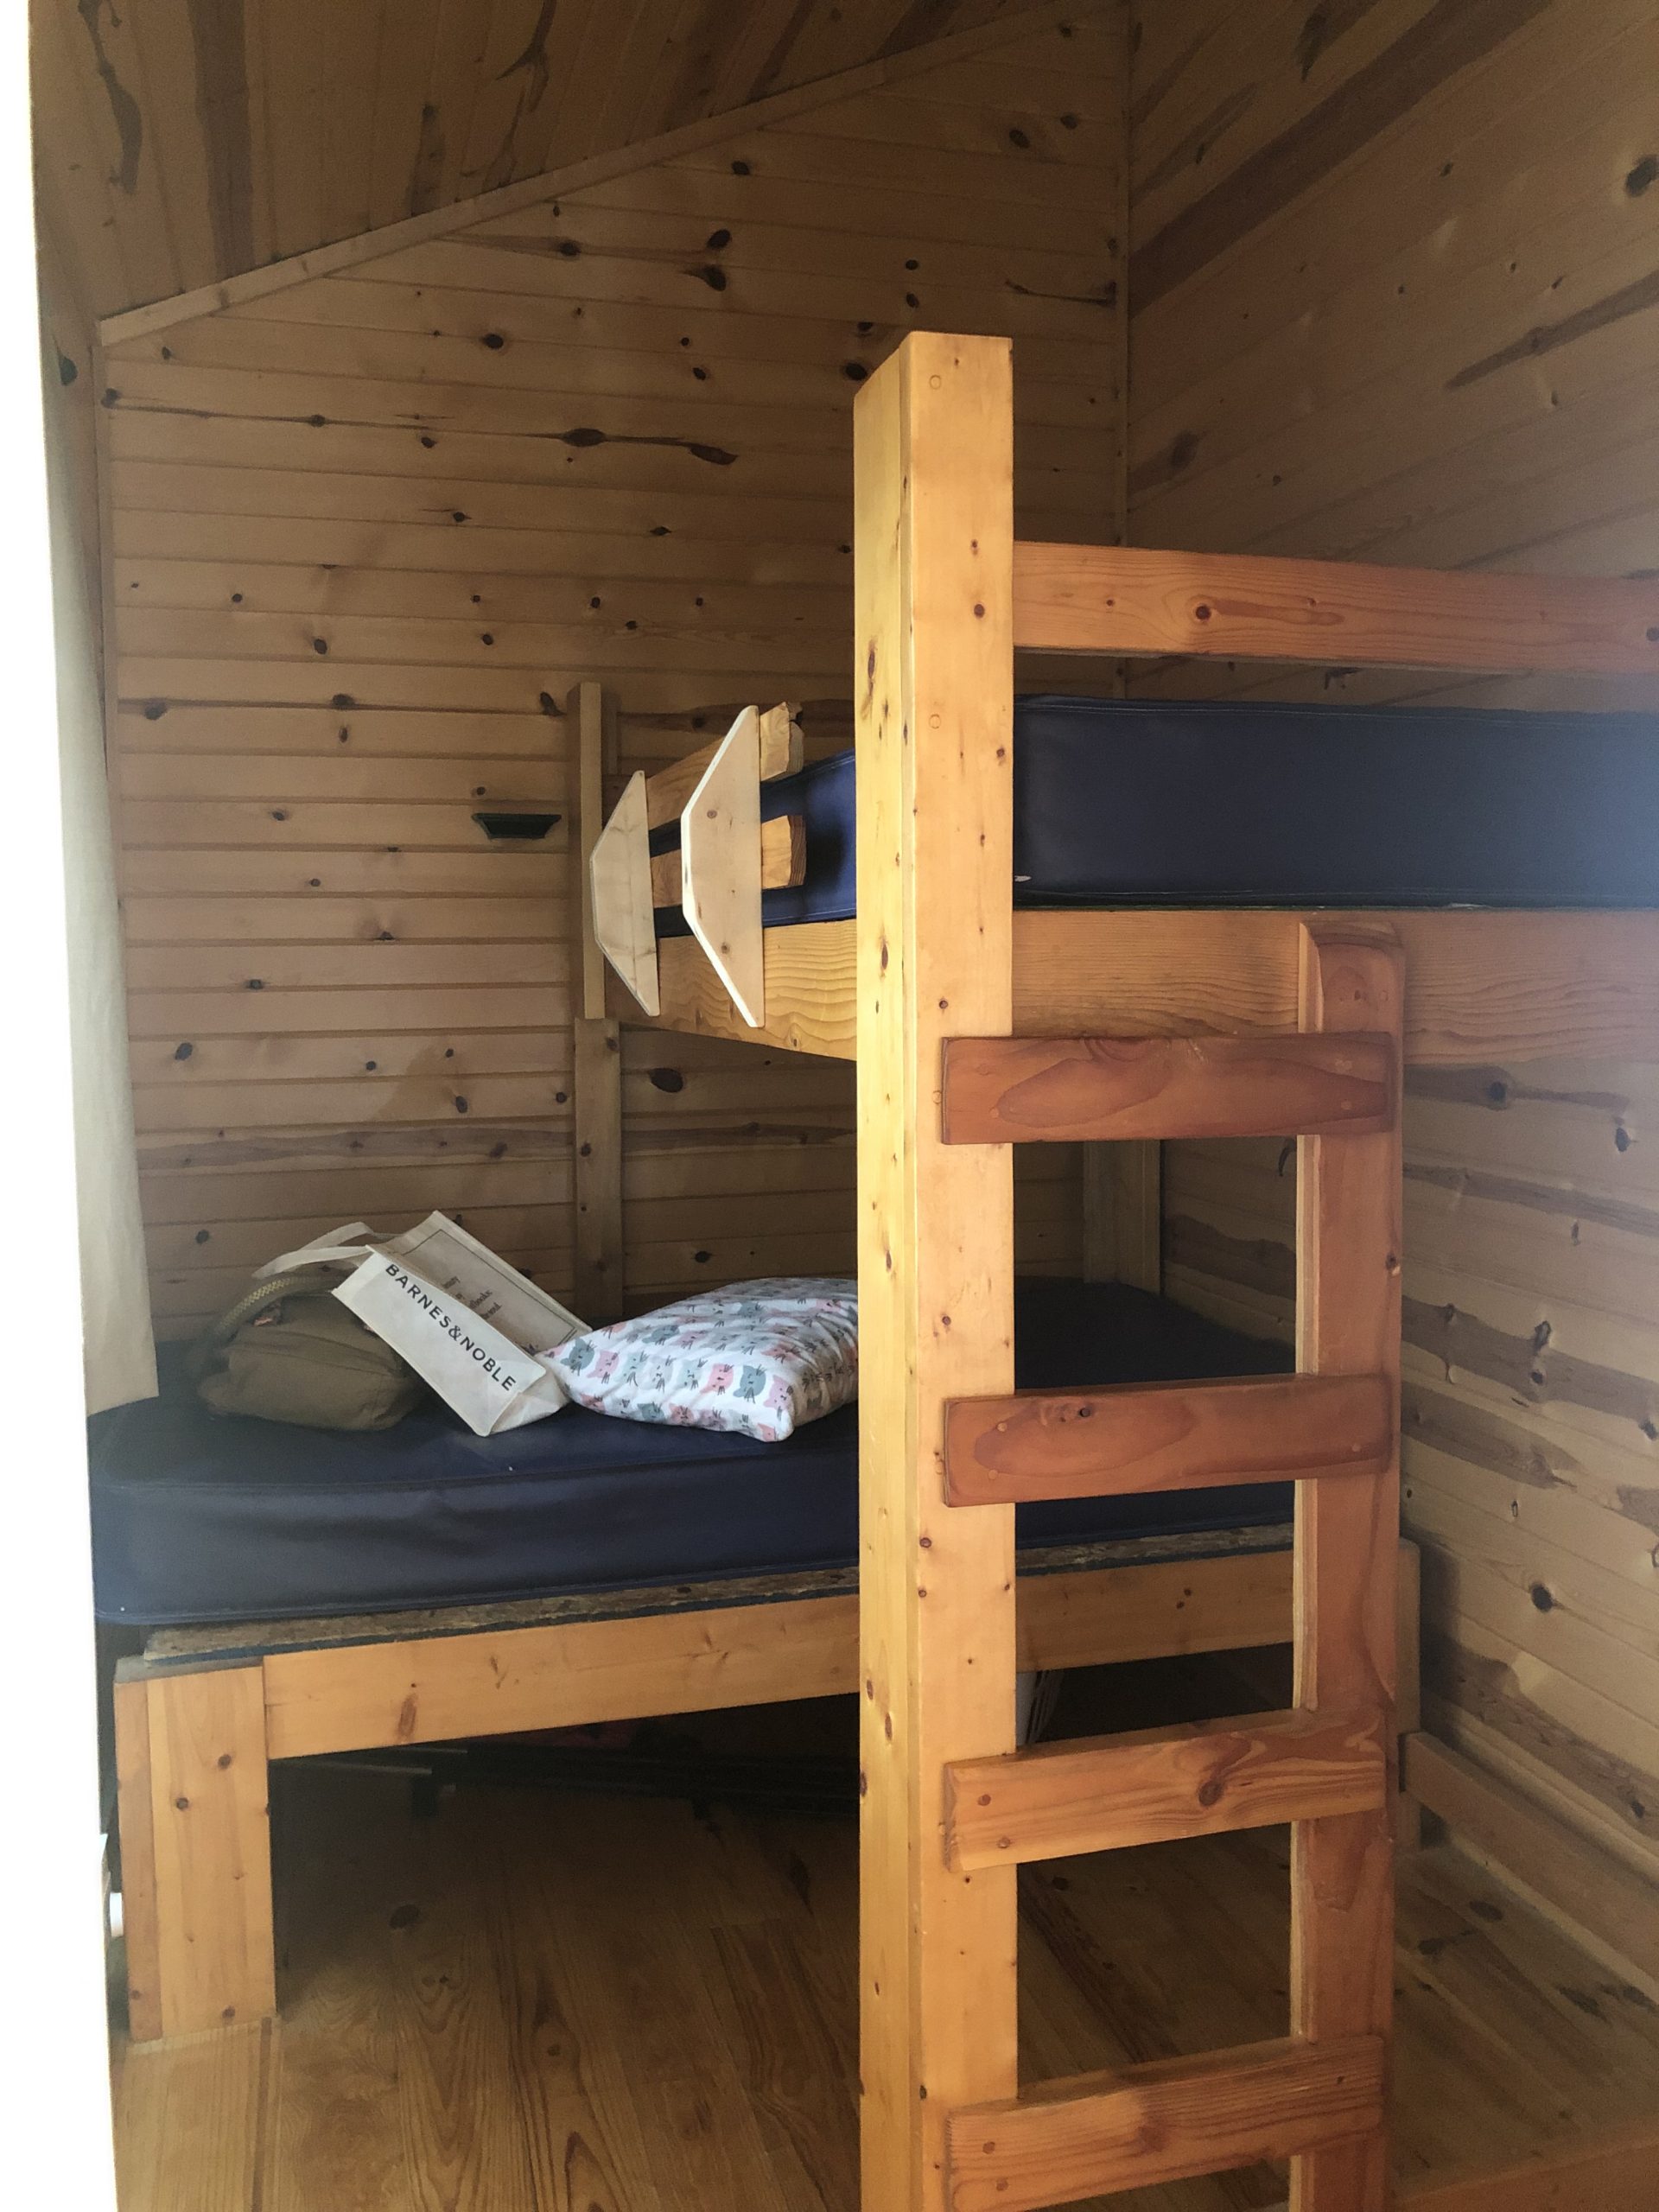 Ionia State Park Cabins - Walleye Bedroom 1